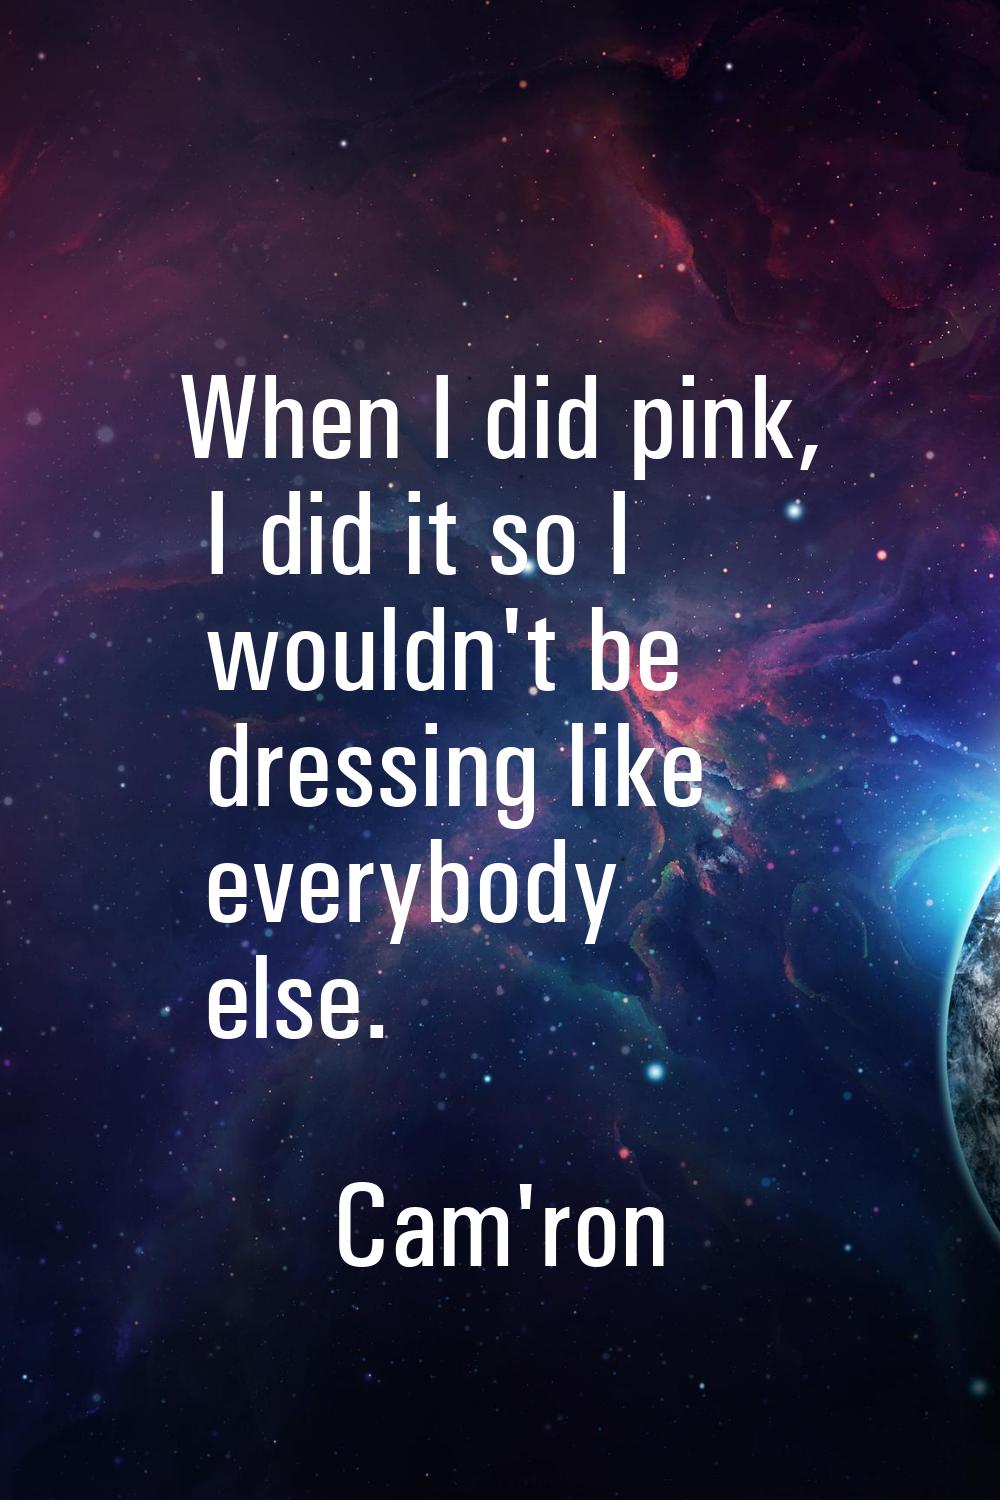 When I did pink, I did it so I wouldn't be dressing like everybody else.